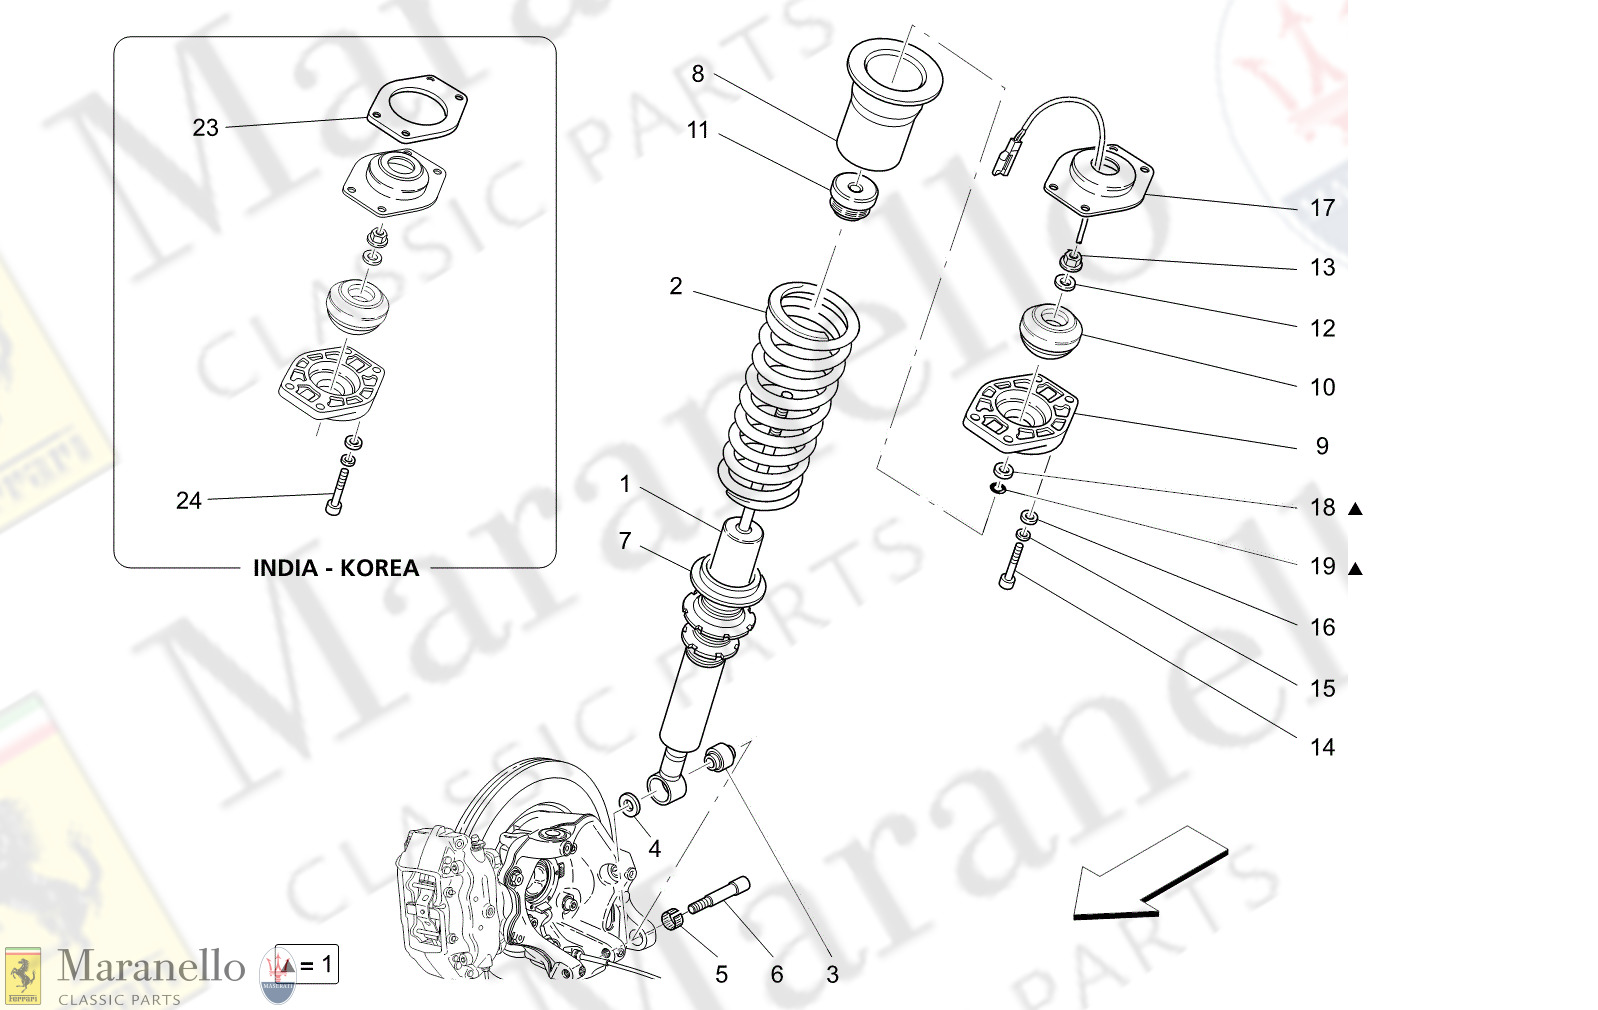 06.21 - 2 - 0621 - 2 Rear Shock Absorber Devices